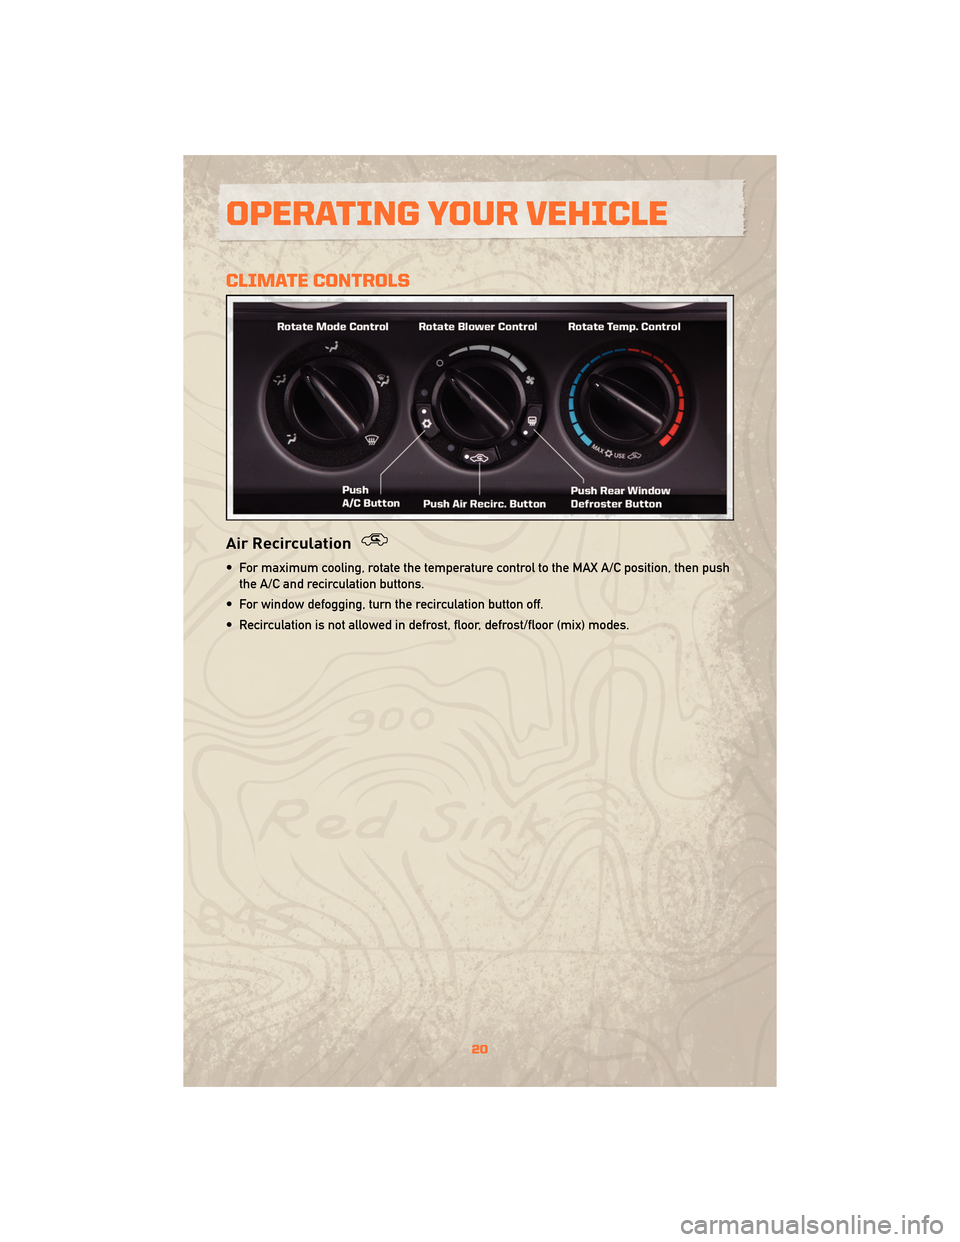 JEEP WRANGLER 2010 JK / 3.G Owners Manual CLIMATE CONTROLS
Air Recirculation
• For maximum cooling, rotate the temperature control to the MAX A/C position, then pushthe A/C and recirculation buttons.
• For window defogging, turn the recir